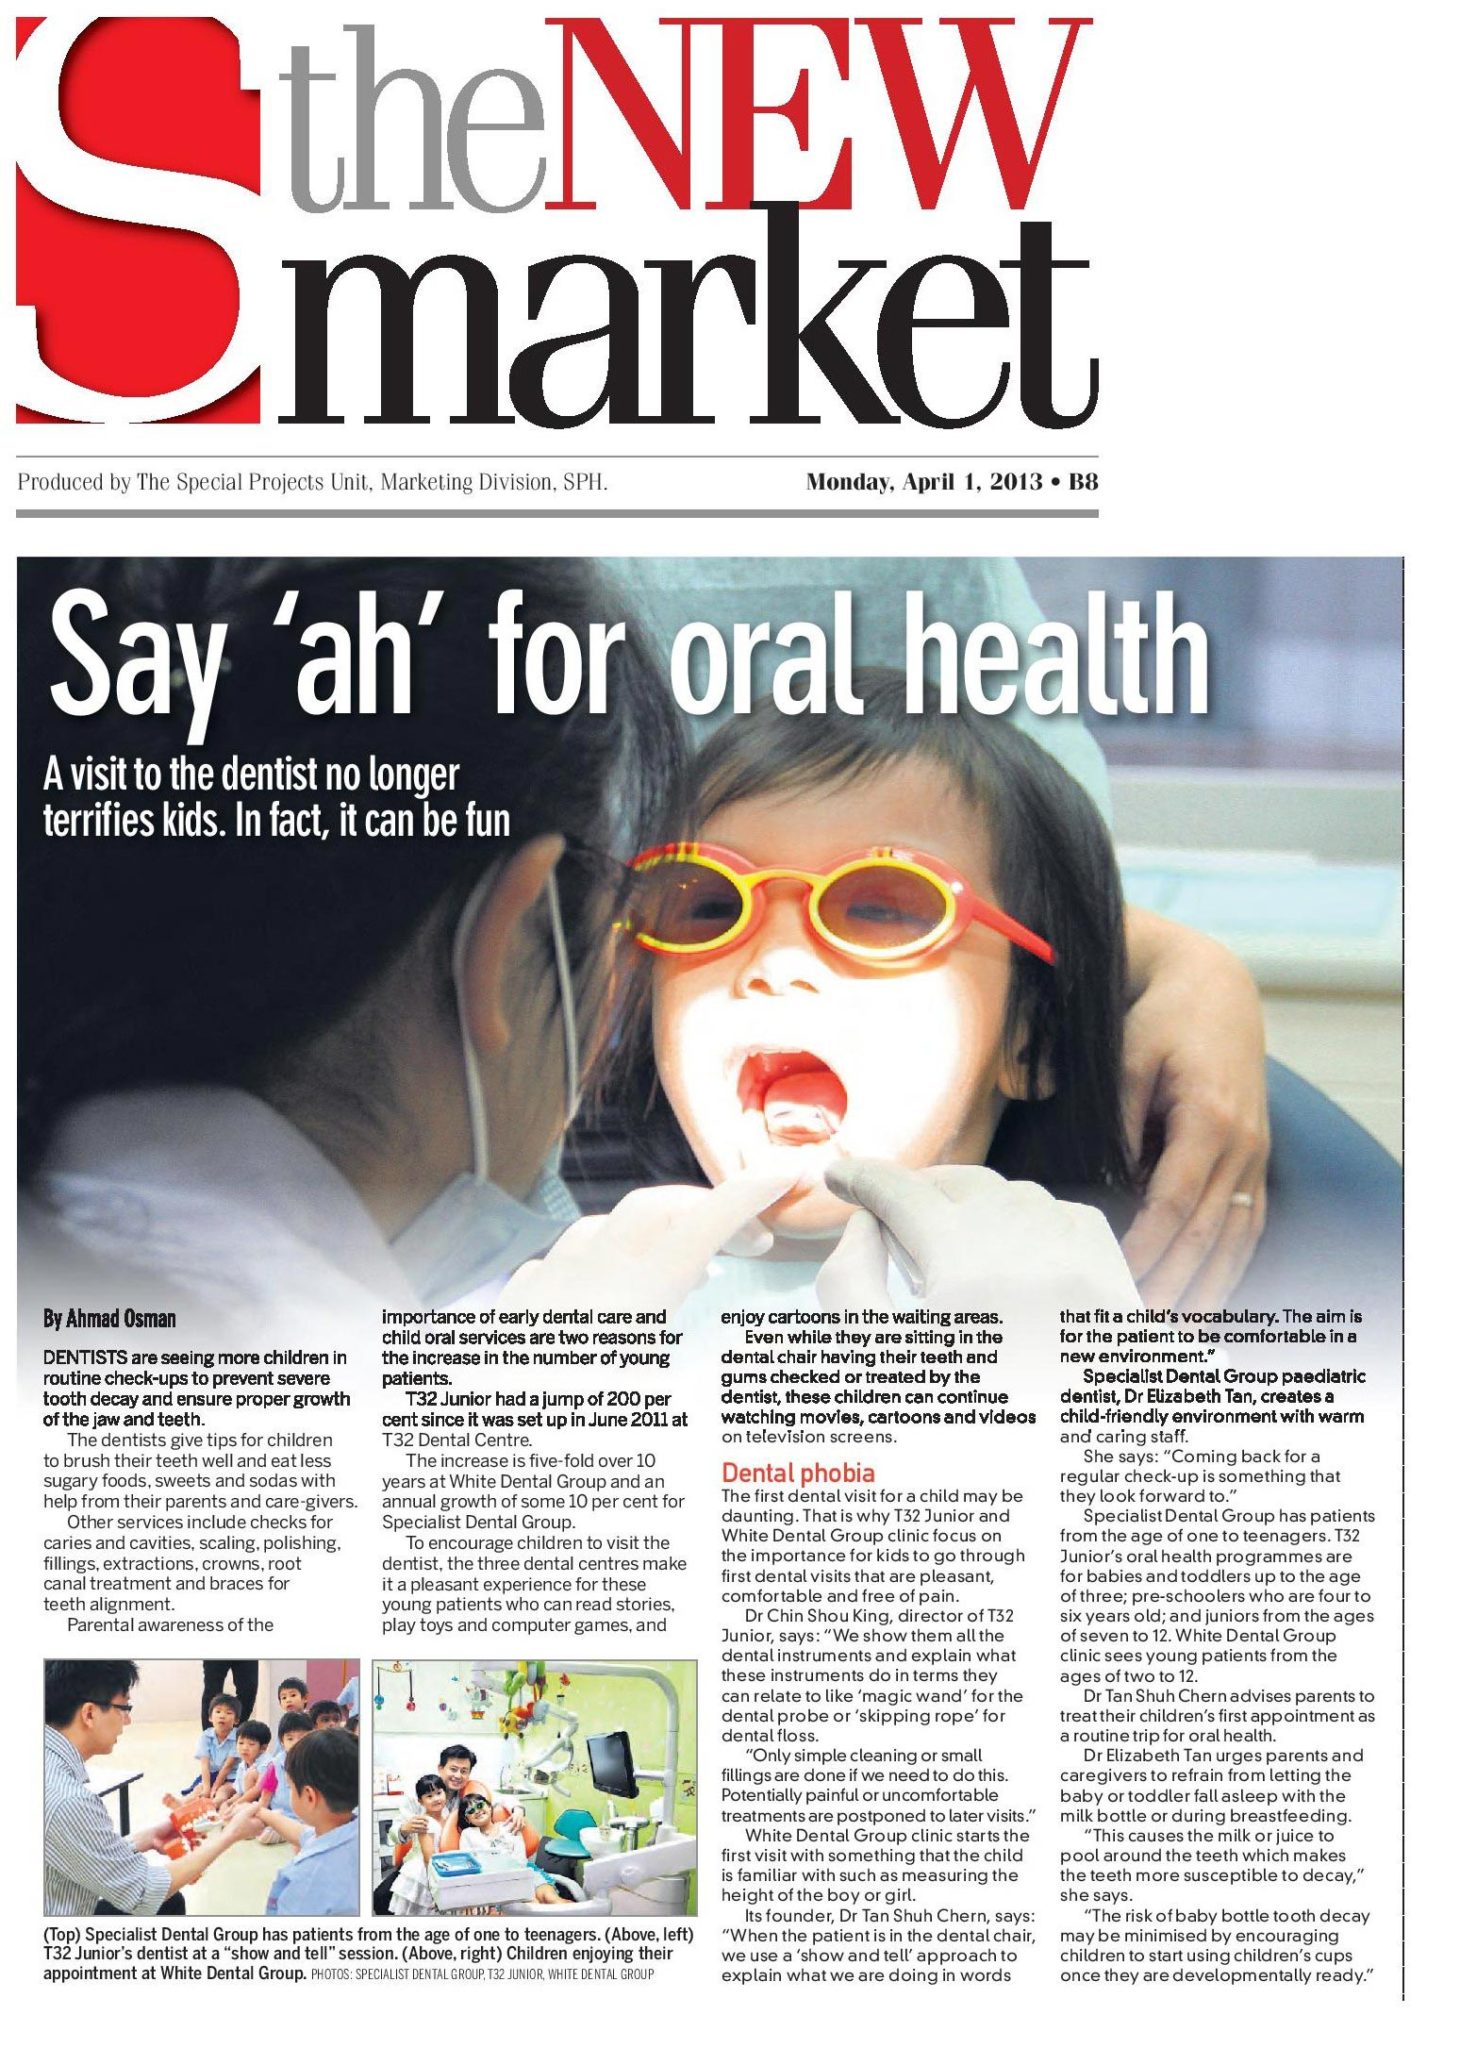 The Straits Times, The New Market, April 1, 2013: “Say ‘ah’ for oral health” (id)